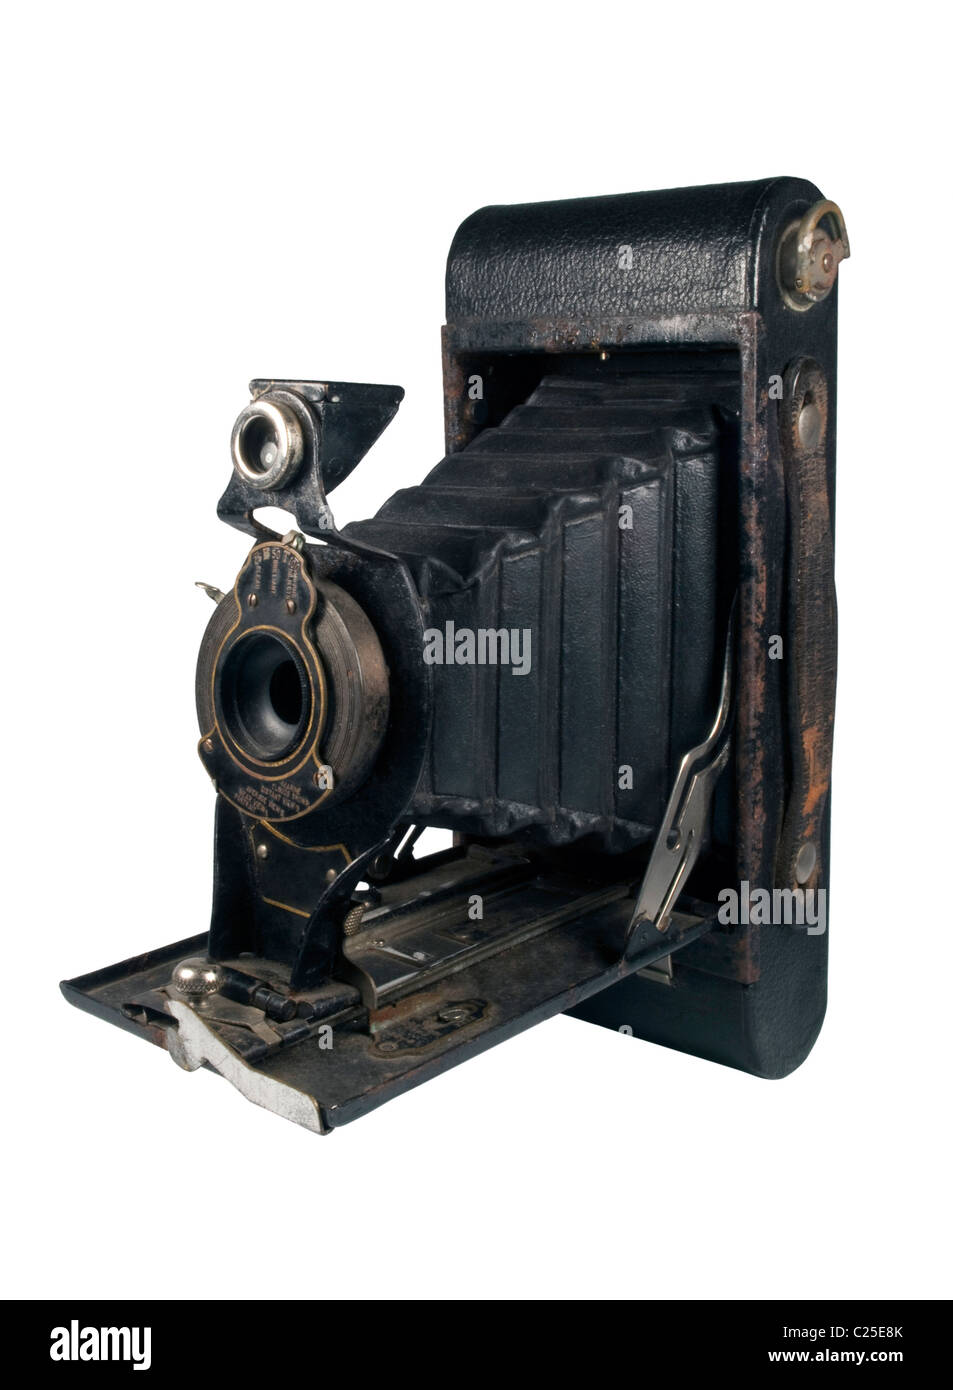 Closeup on the Old Vintage Foldable Camera on White Background Stock Photo